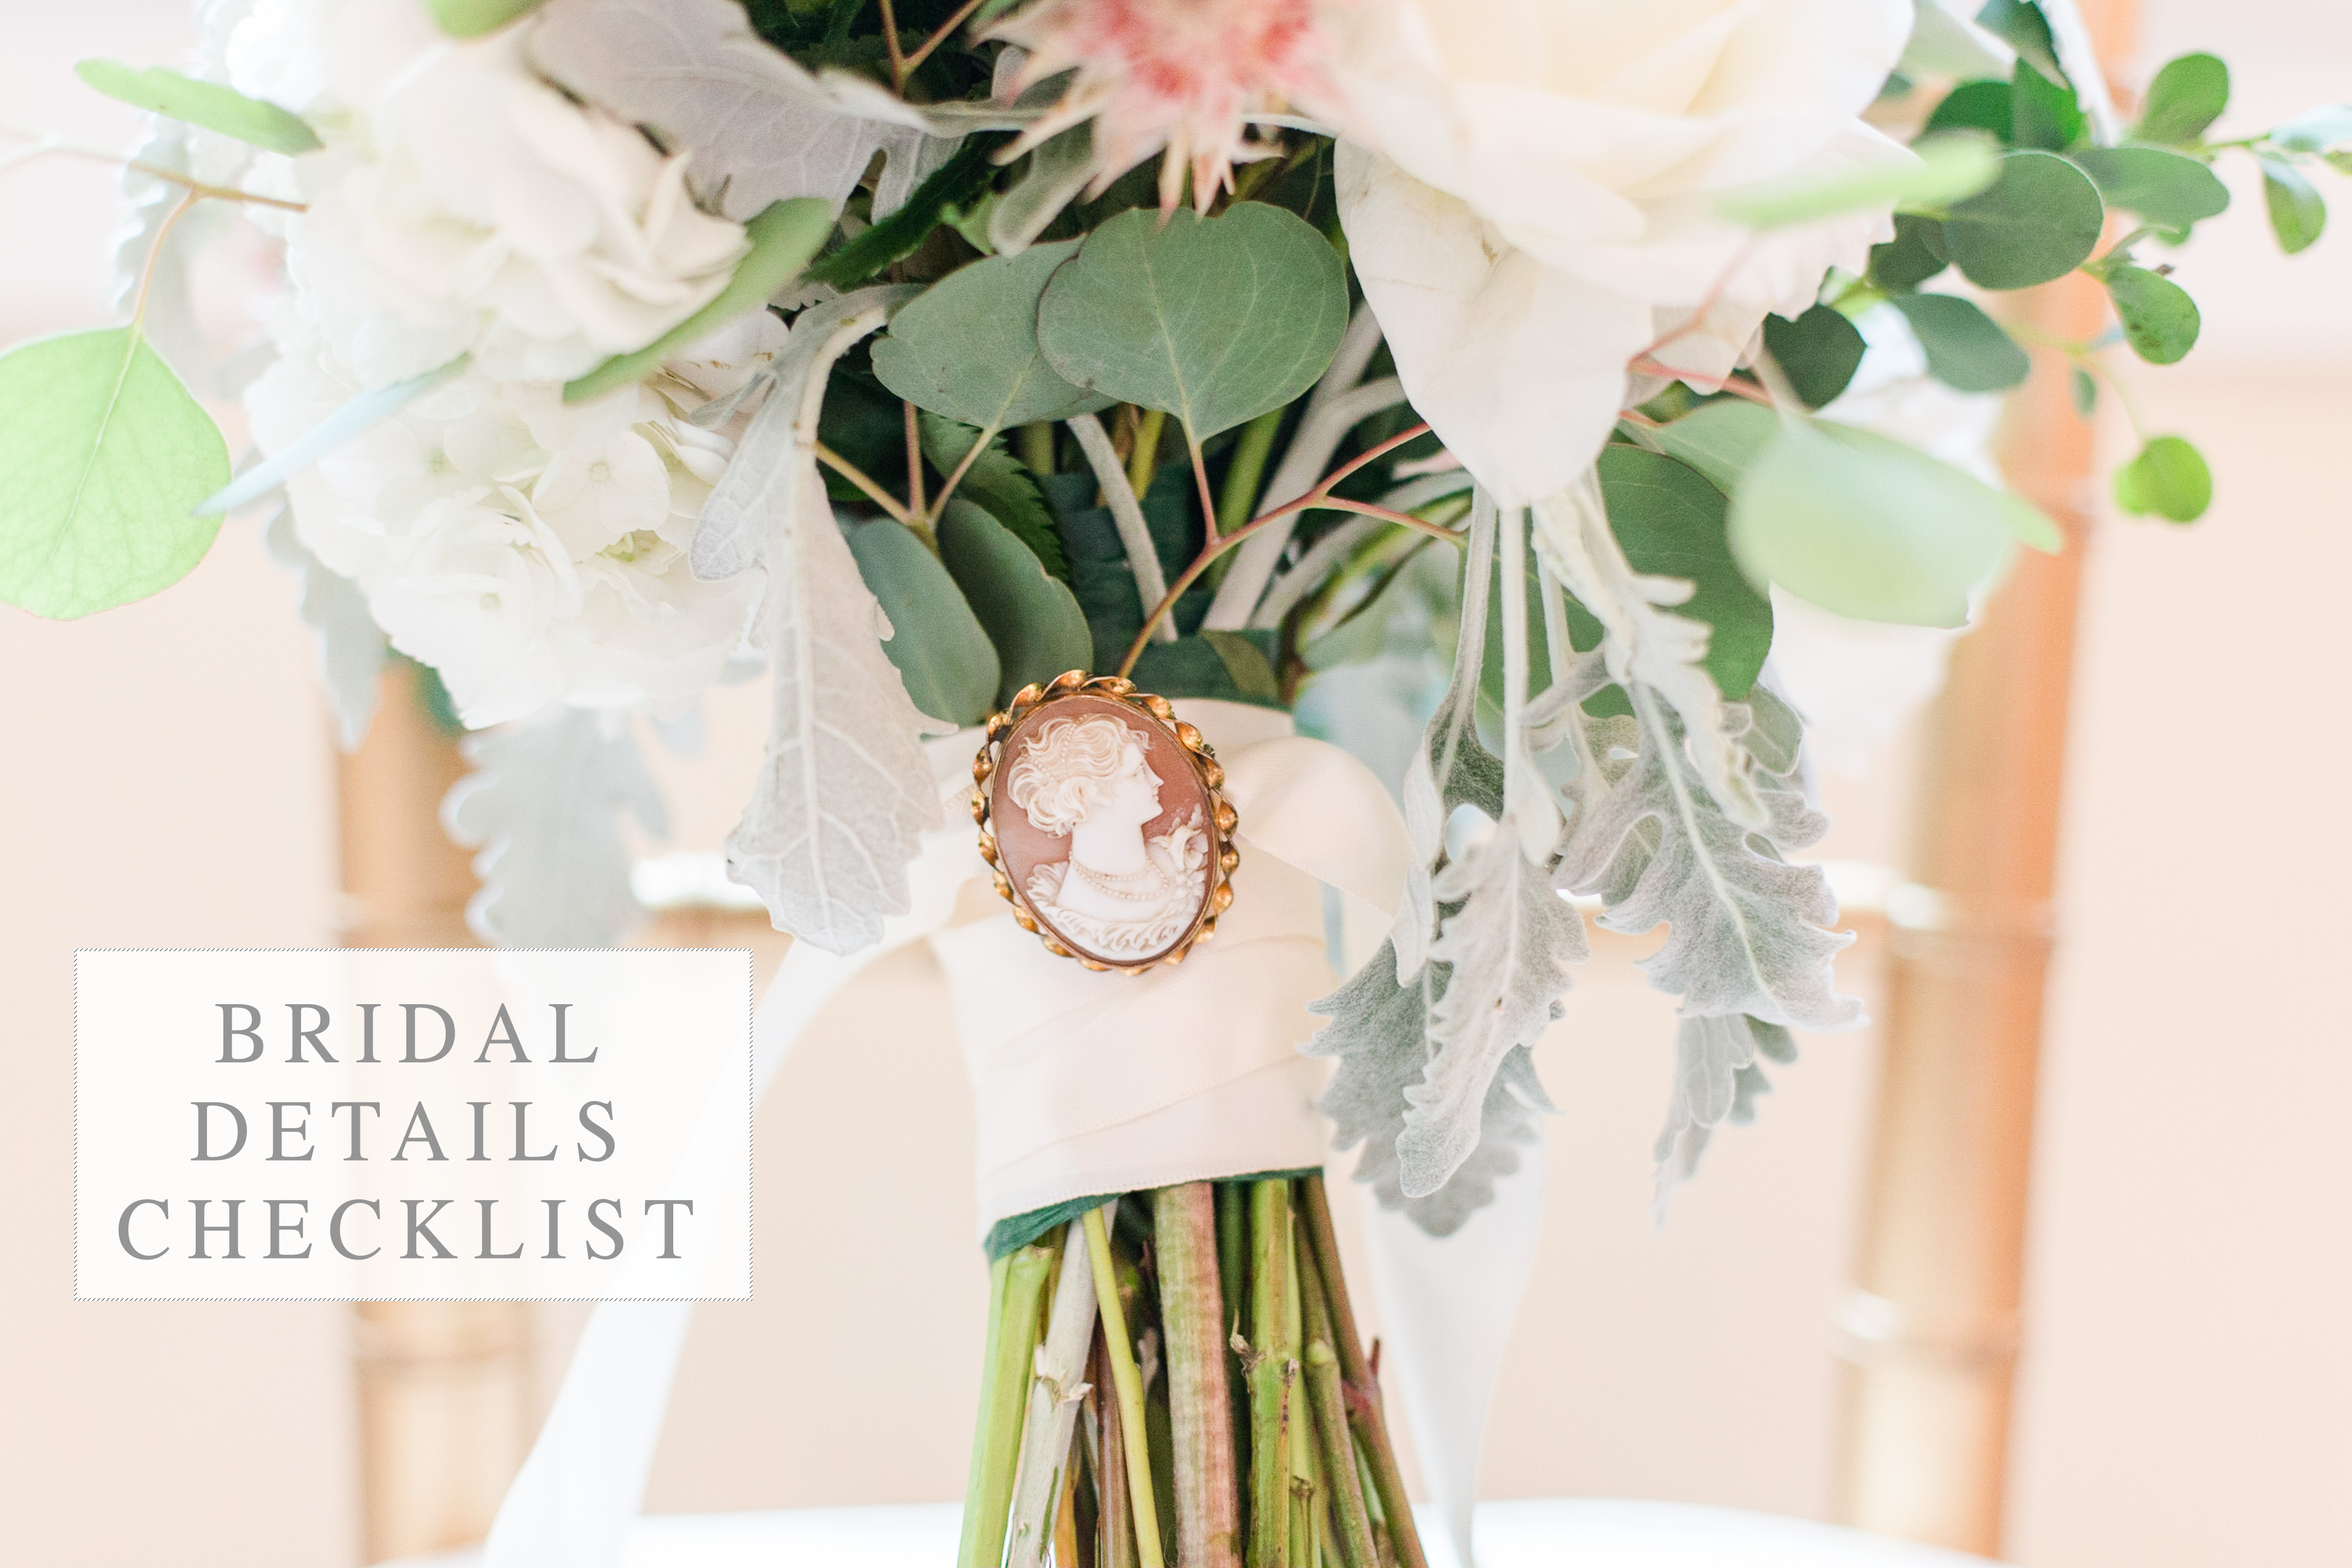 Bridal Details Checklist by Angie McPherson Photography